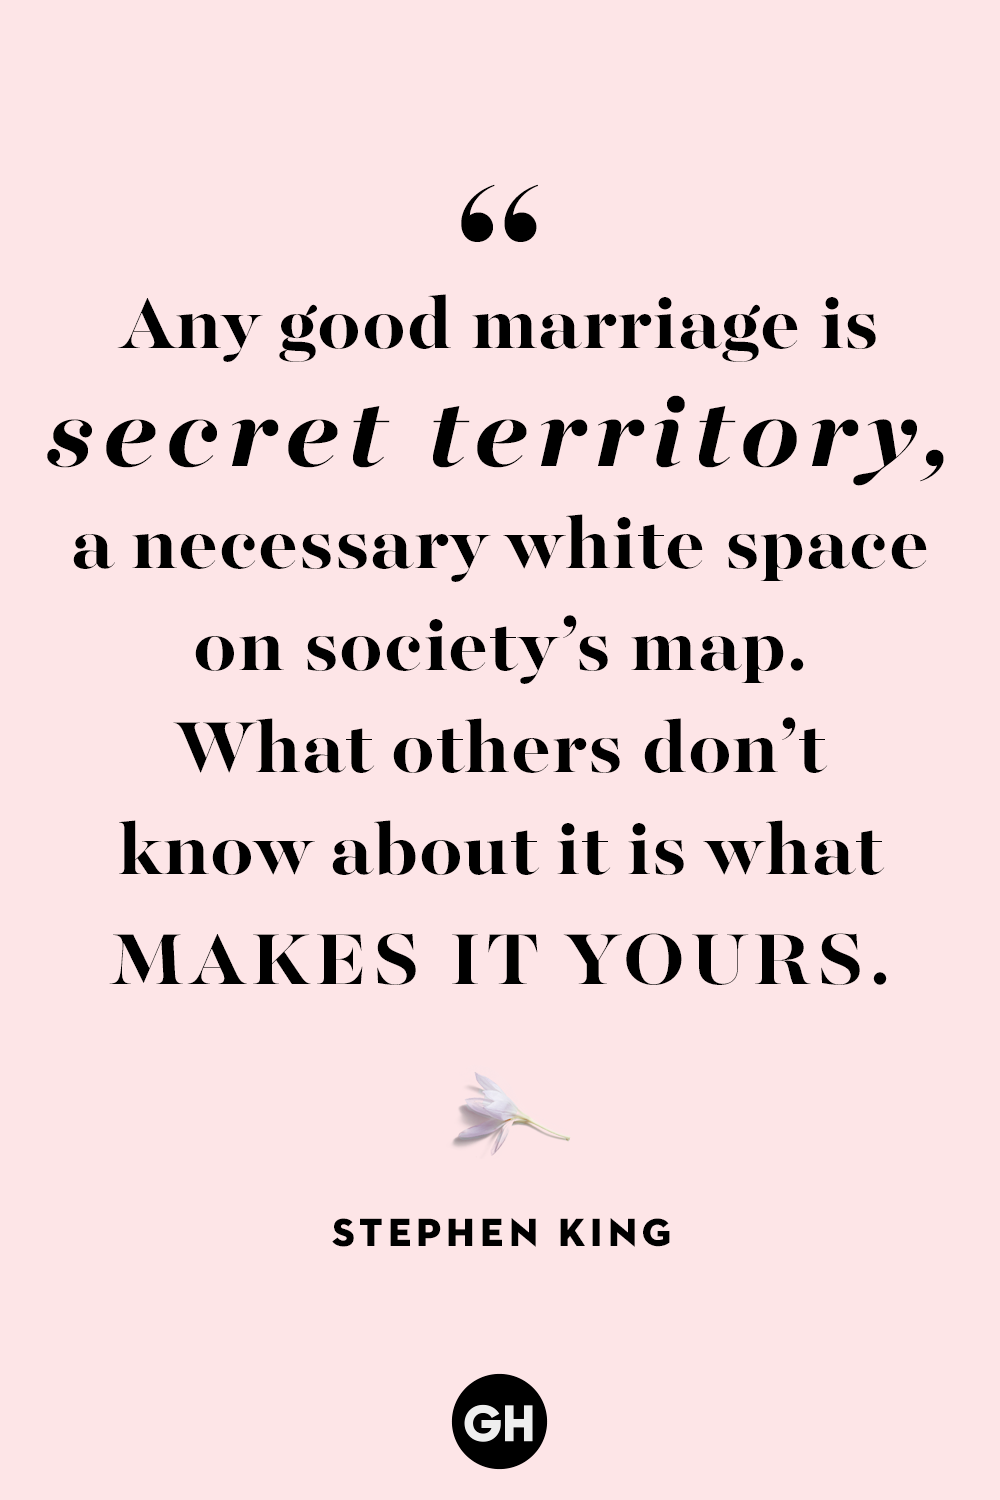 Quotes easy isn marriage t Marriage Quotes